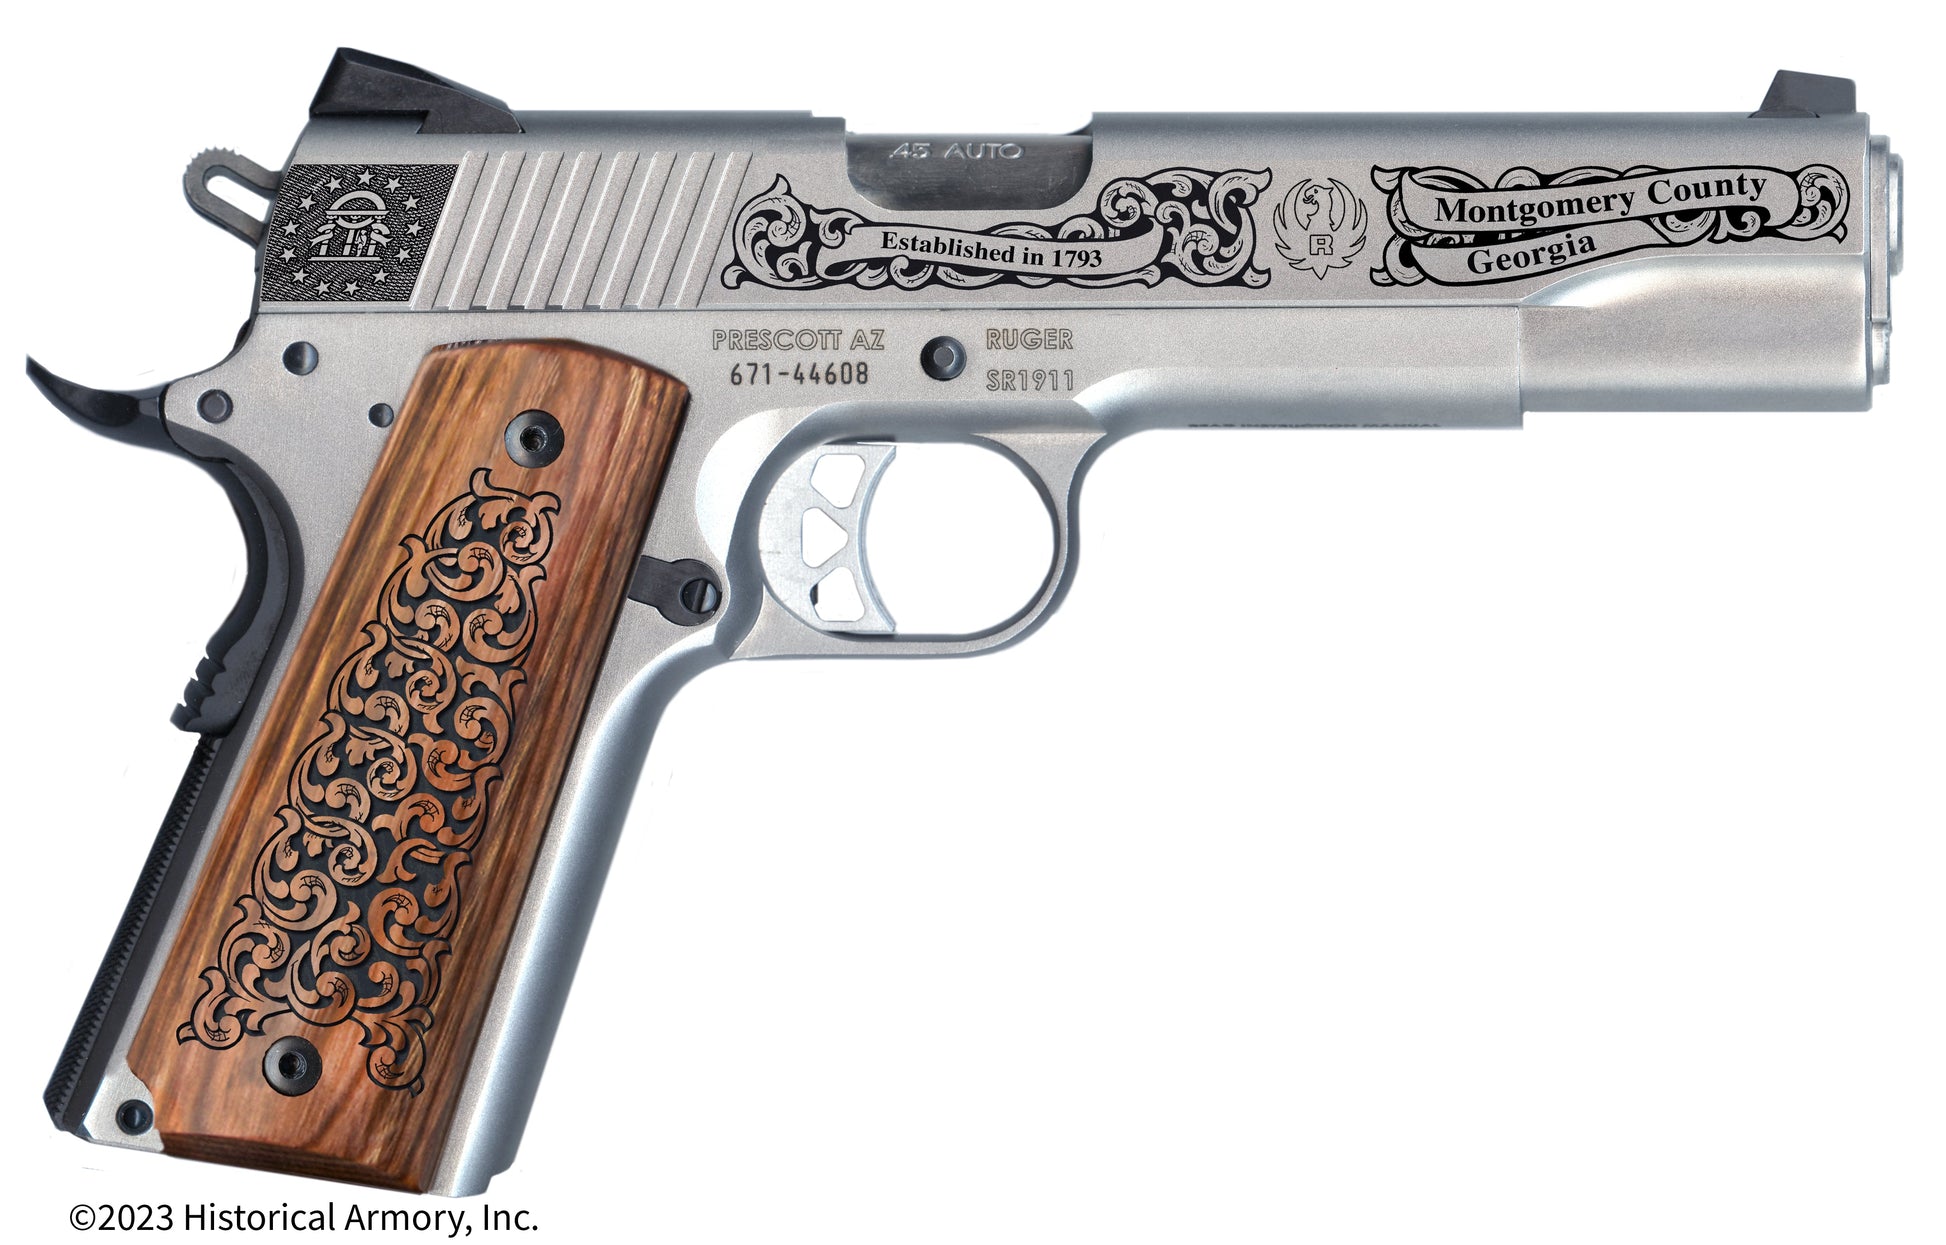 Montgomery County Georgia Engraved .45 Auto Ruger 1911